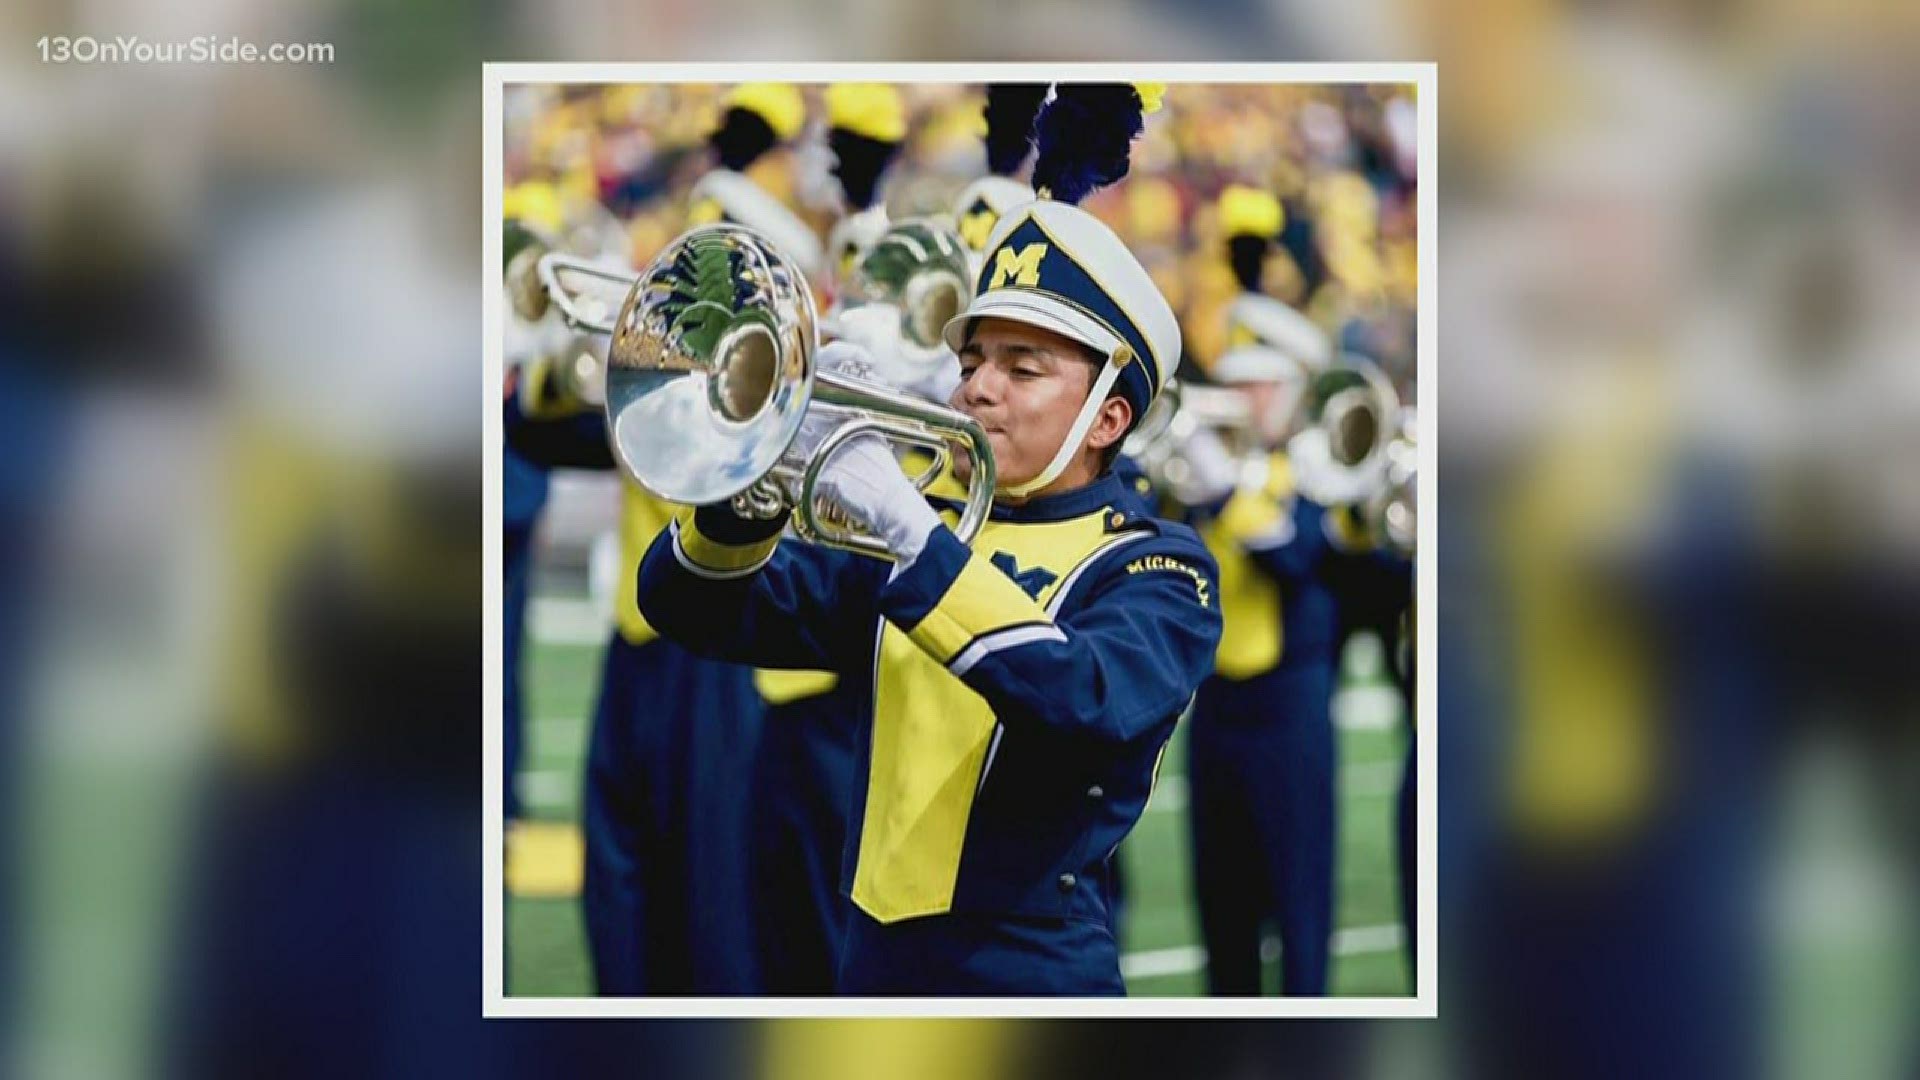 Walter Aguilar graduated from Lee High School and he will be the University of  Michigan's drum major for the 2020-21 season